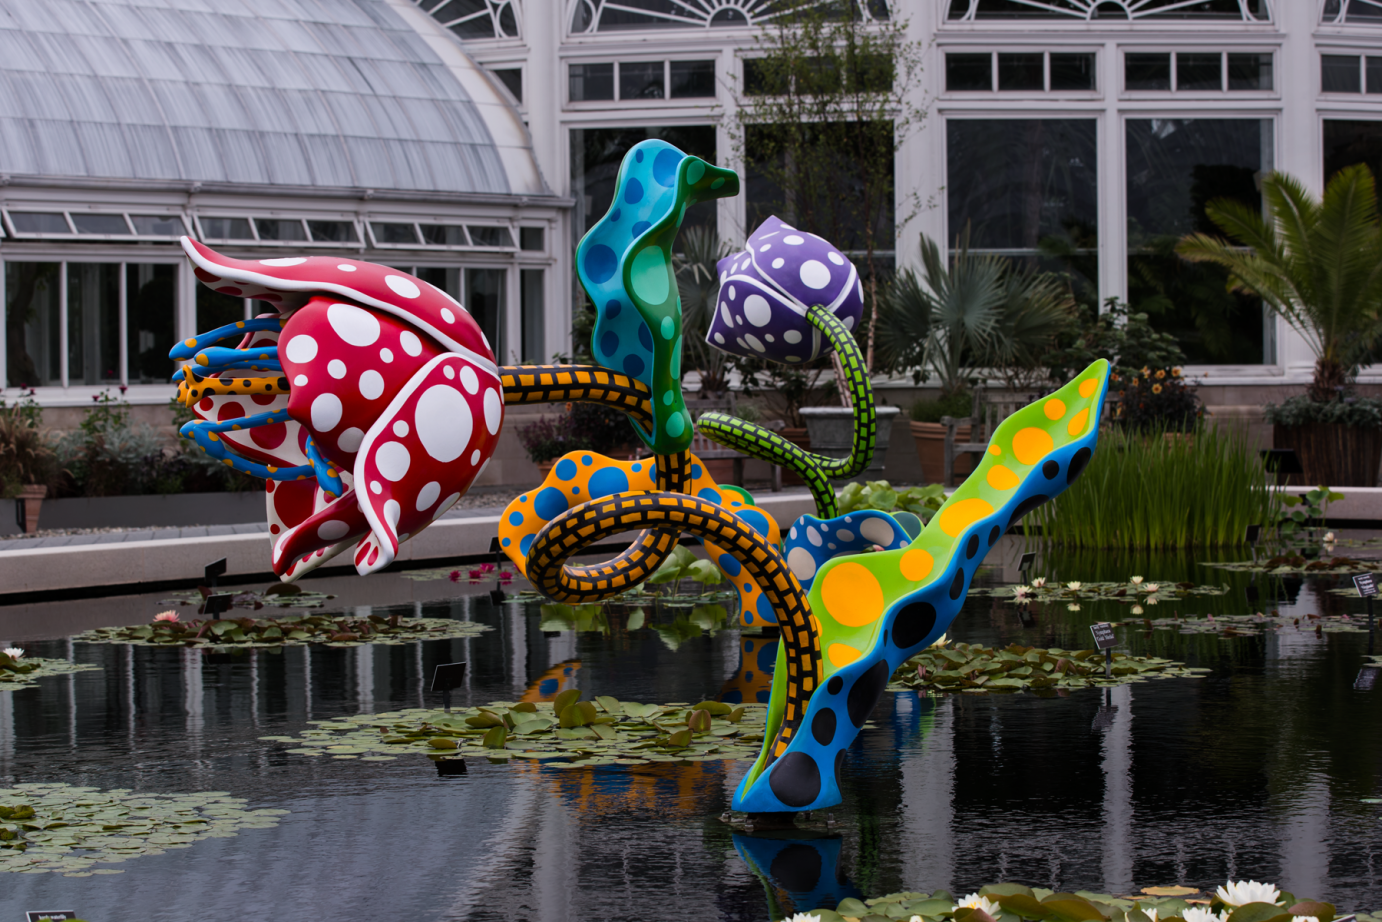 at the Brooklyn Botanical Garden a huge sculpture of dancing tulips stands int he middle of a waterlily pond. The artist Yayio Kusama uses bright colors and dots to express herself in a whimsical fashion.